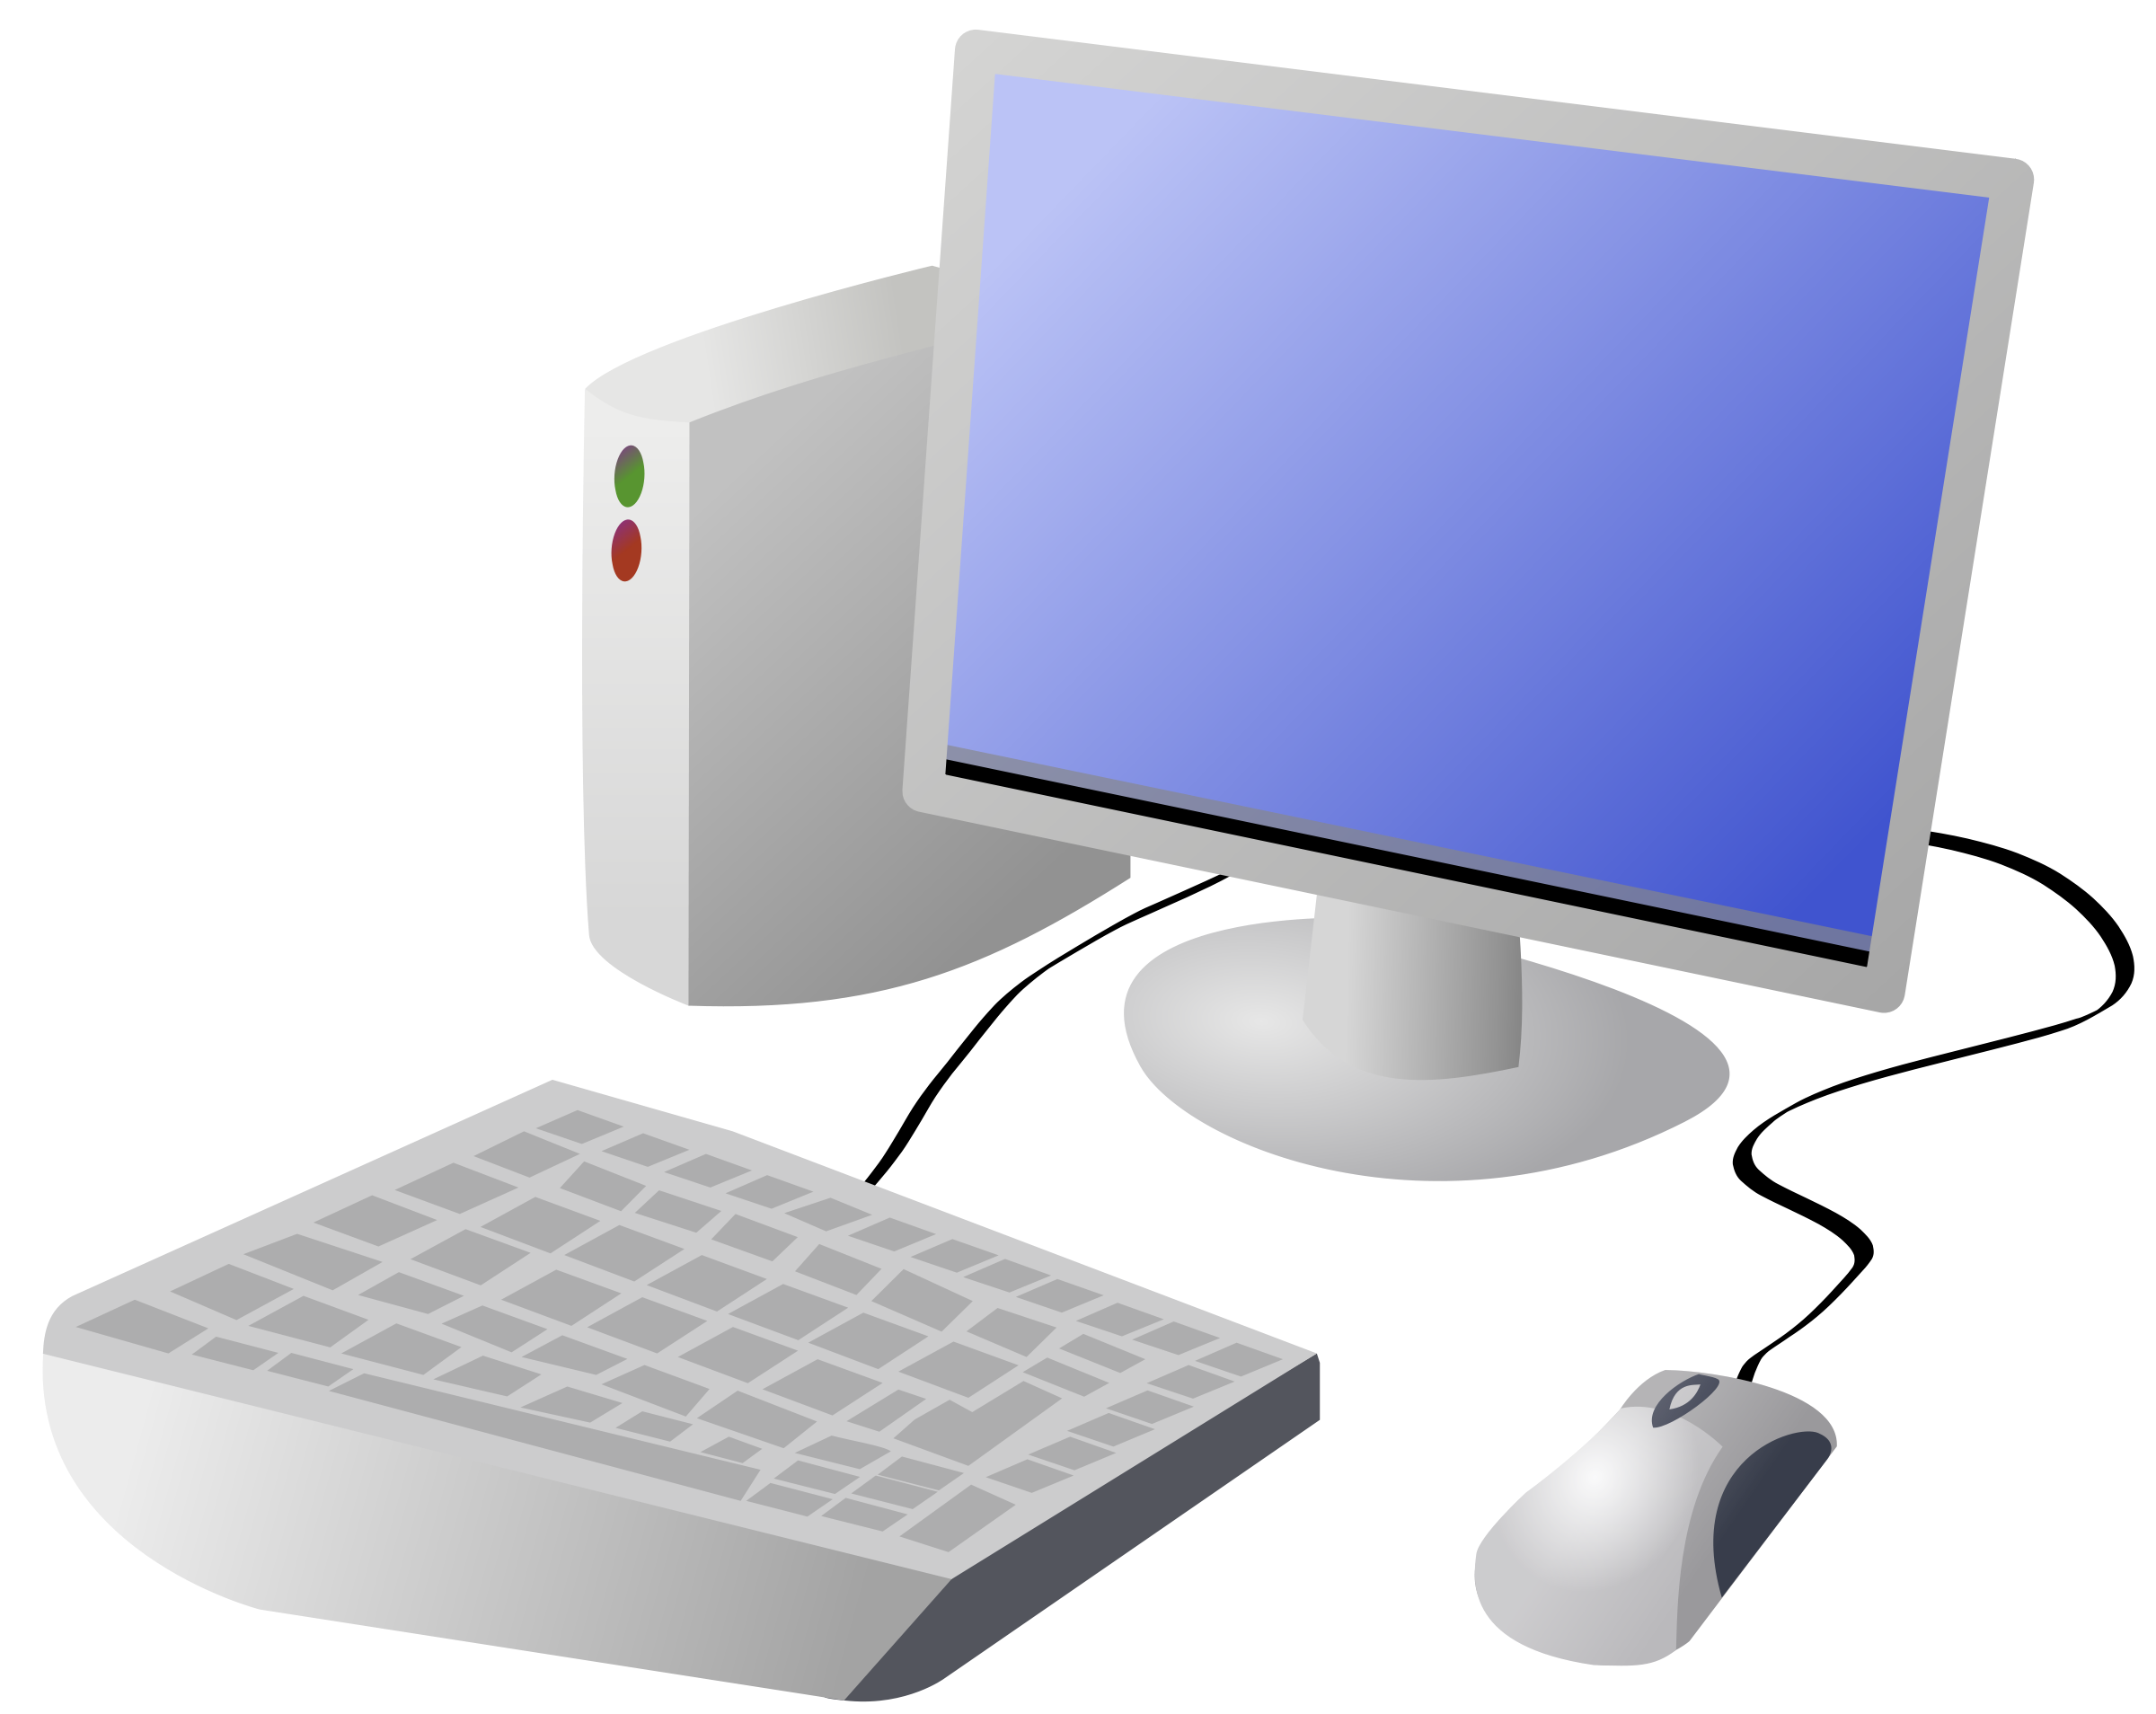 Cartoon Picture Of Computer - ClipArt Best